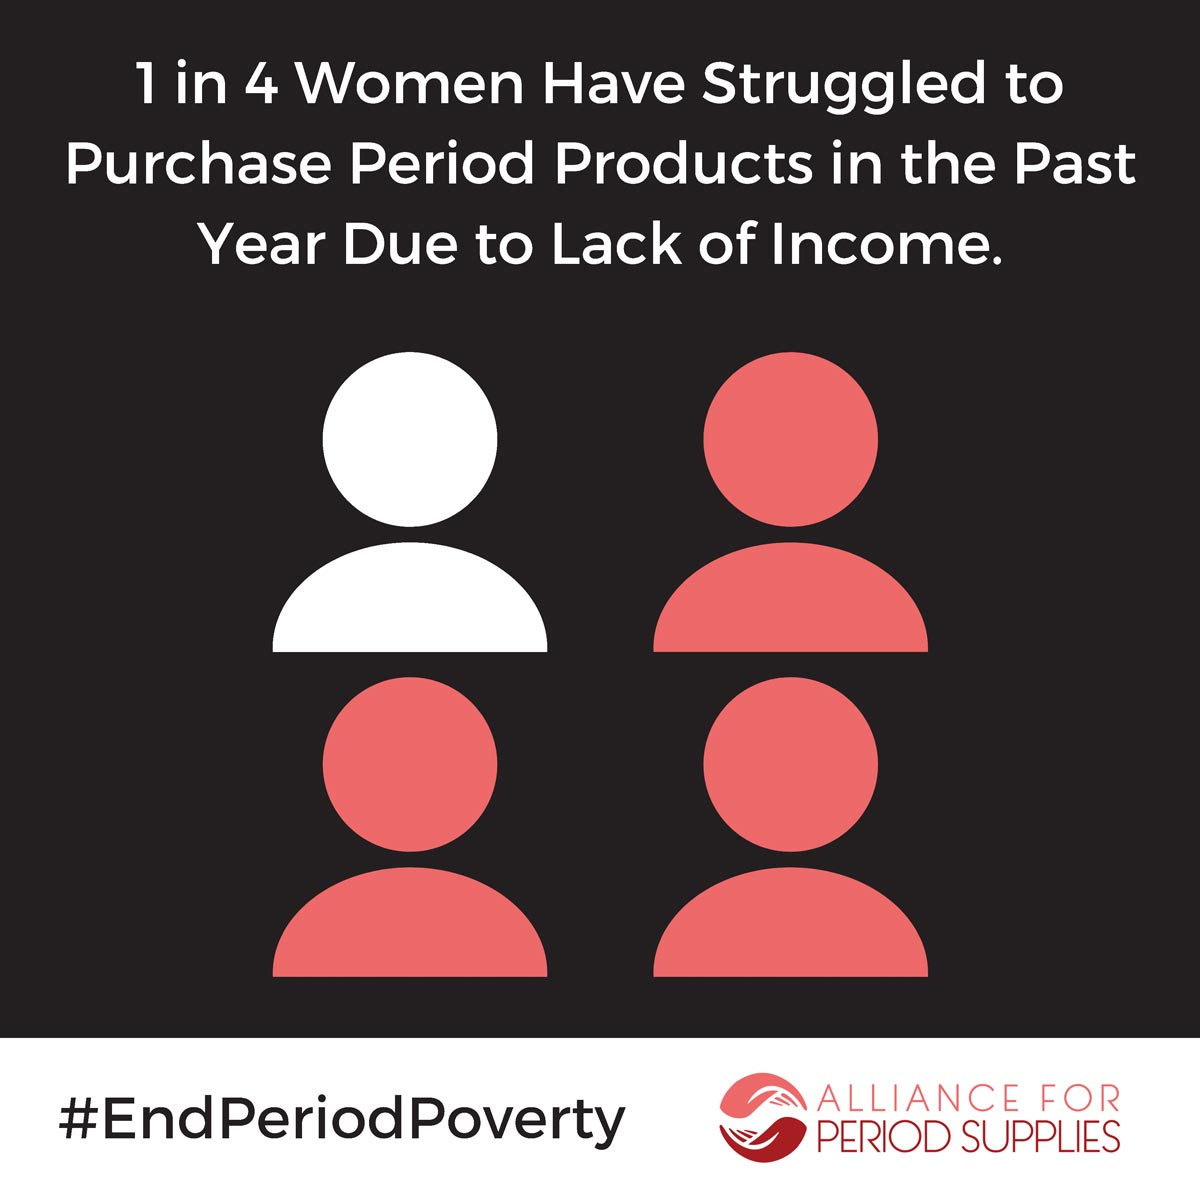 Graphic: One in four women have struggled to purchase period products in the past year due to lack of income.